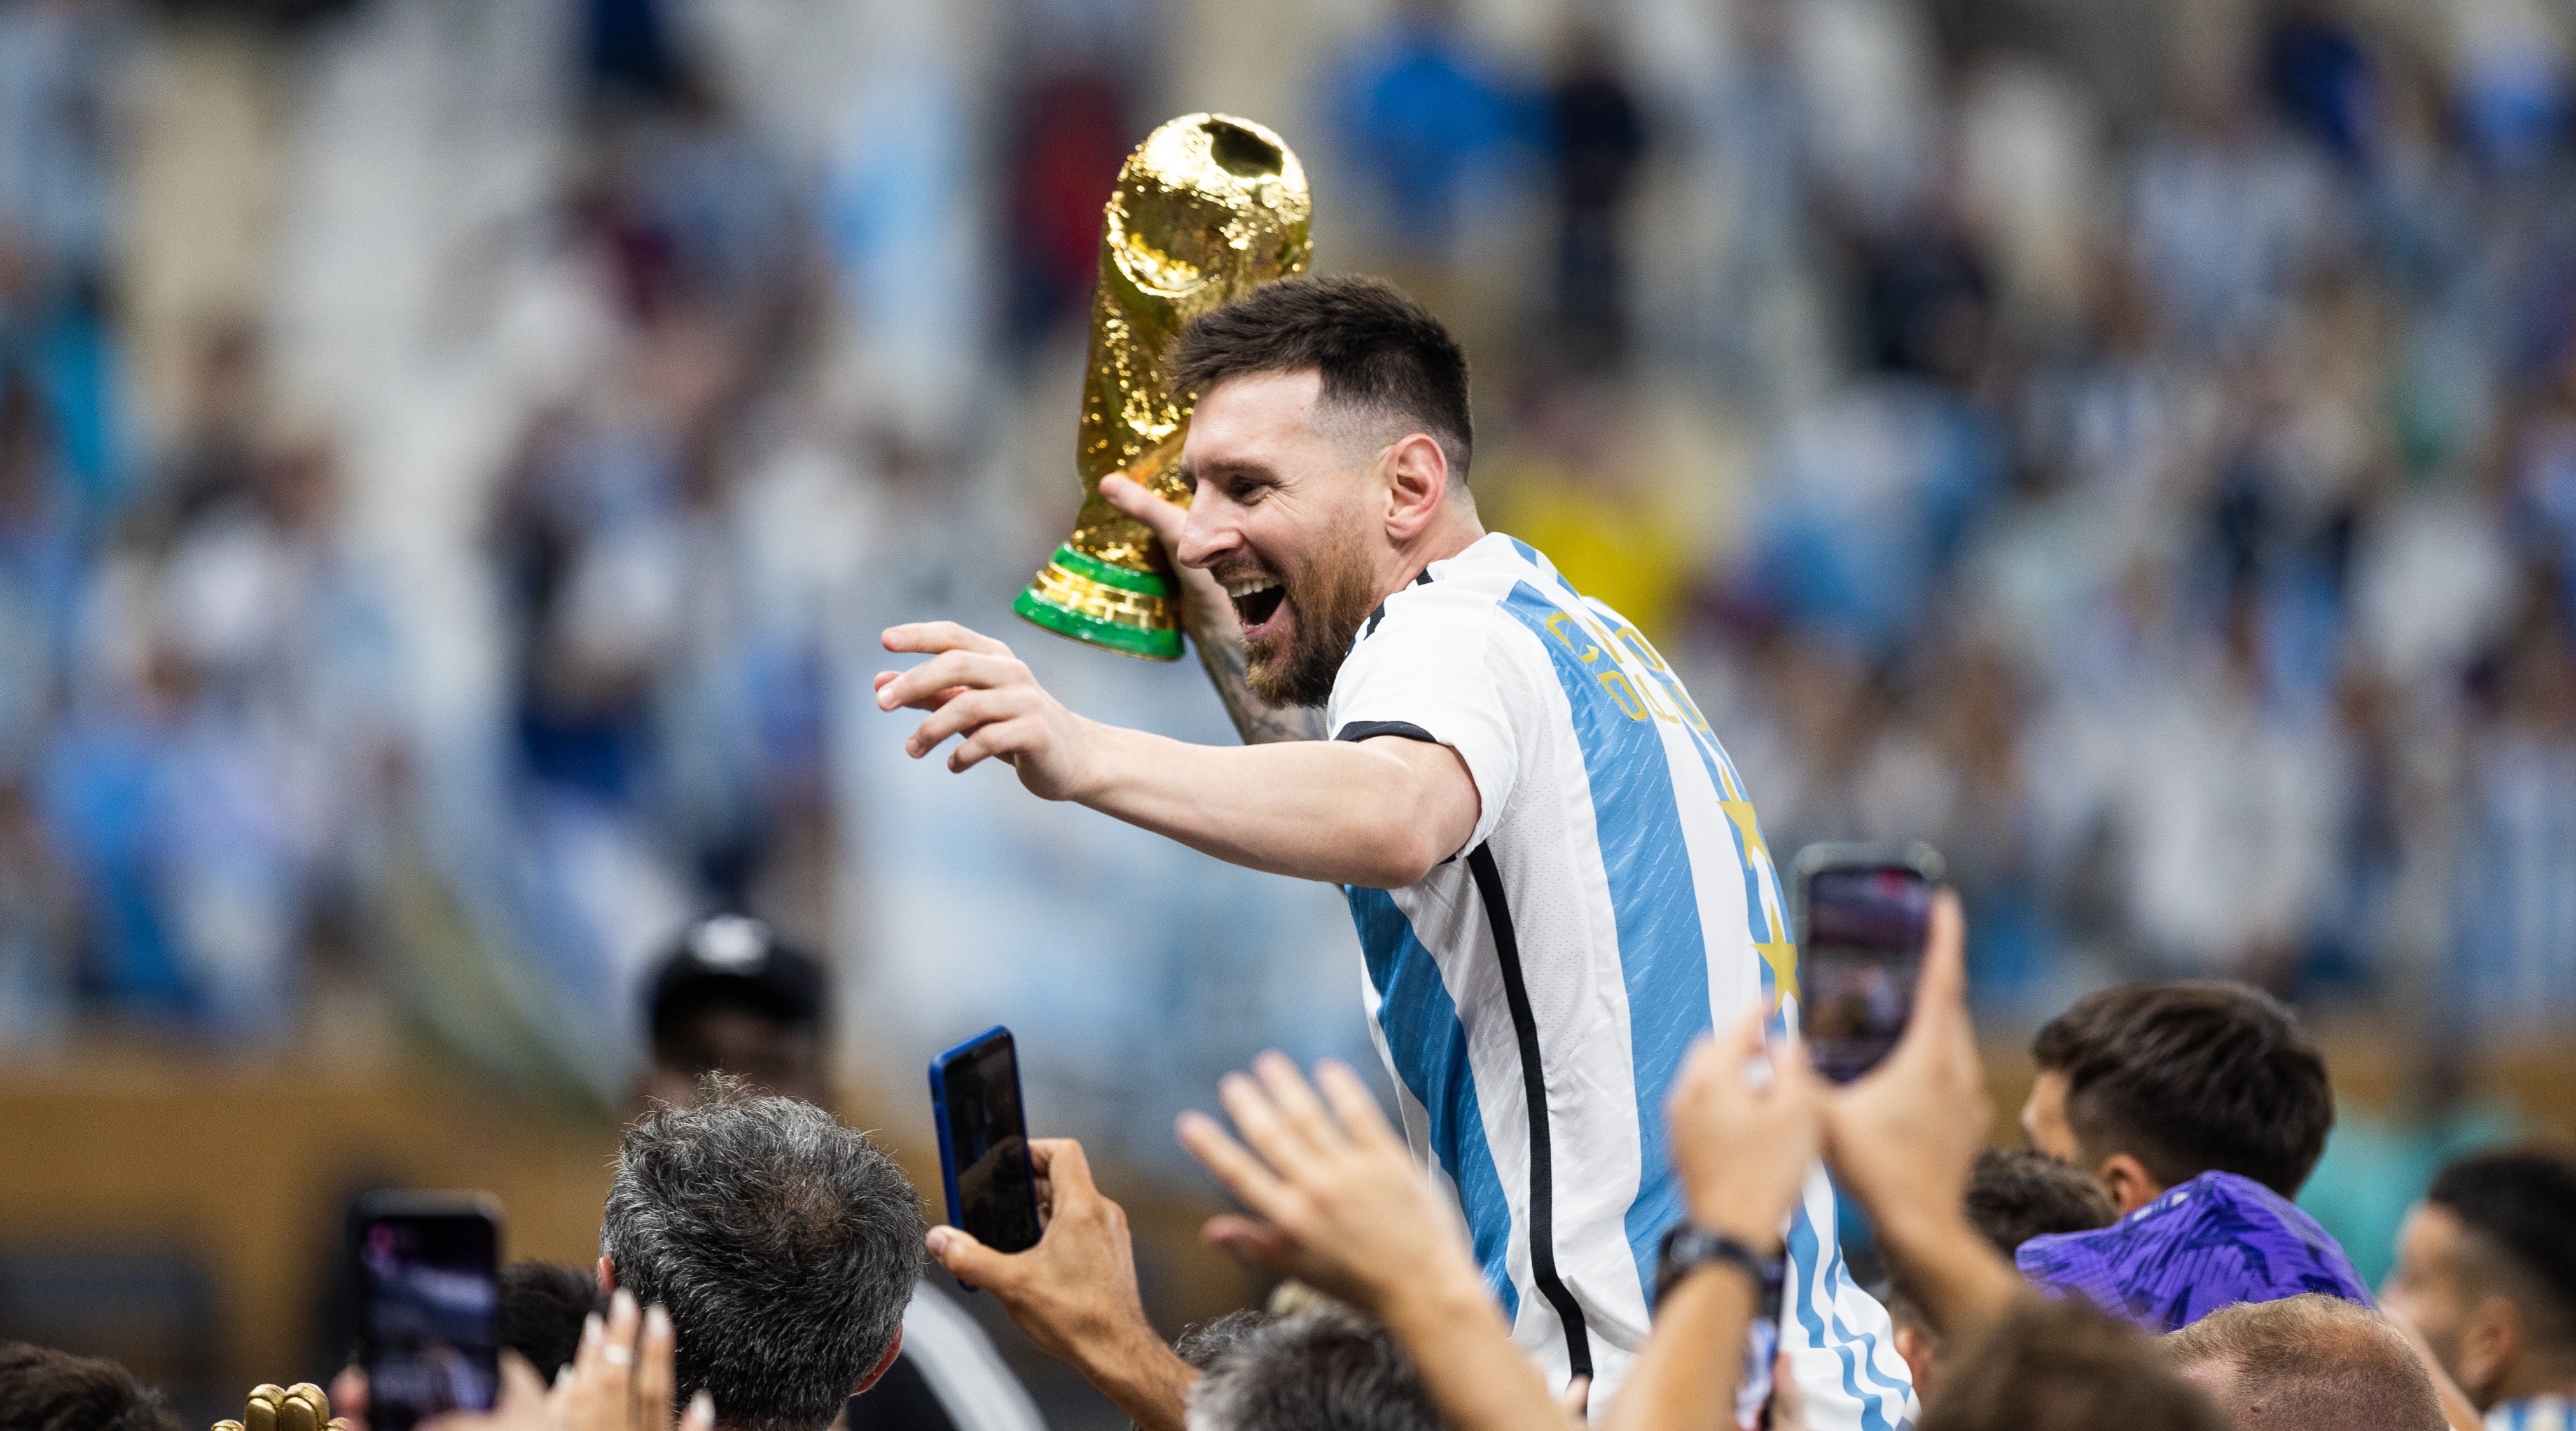 LUSAIL CITY, QATAR - DECEMBER 18: Lionel Messi of Argentina celebrates with the World Cup Trophy after the FIFA World Cup Qatar 2022 Final match between Argentina (3) and France (3) (Argentina win 4-2 on penalties) at Lusail Stadium on December 18, 2022 in Lusail City, Qatar. (Photo by Simon Bruty/Anychance/Getty Images)